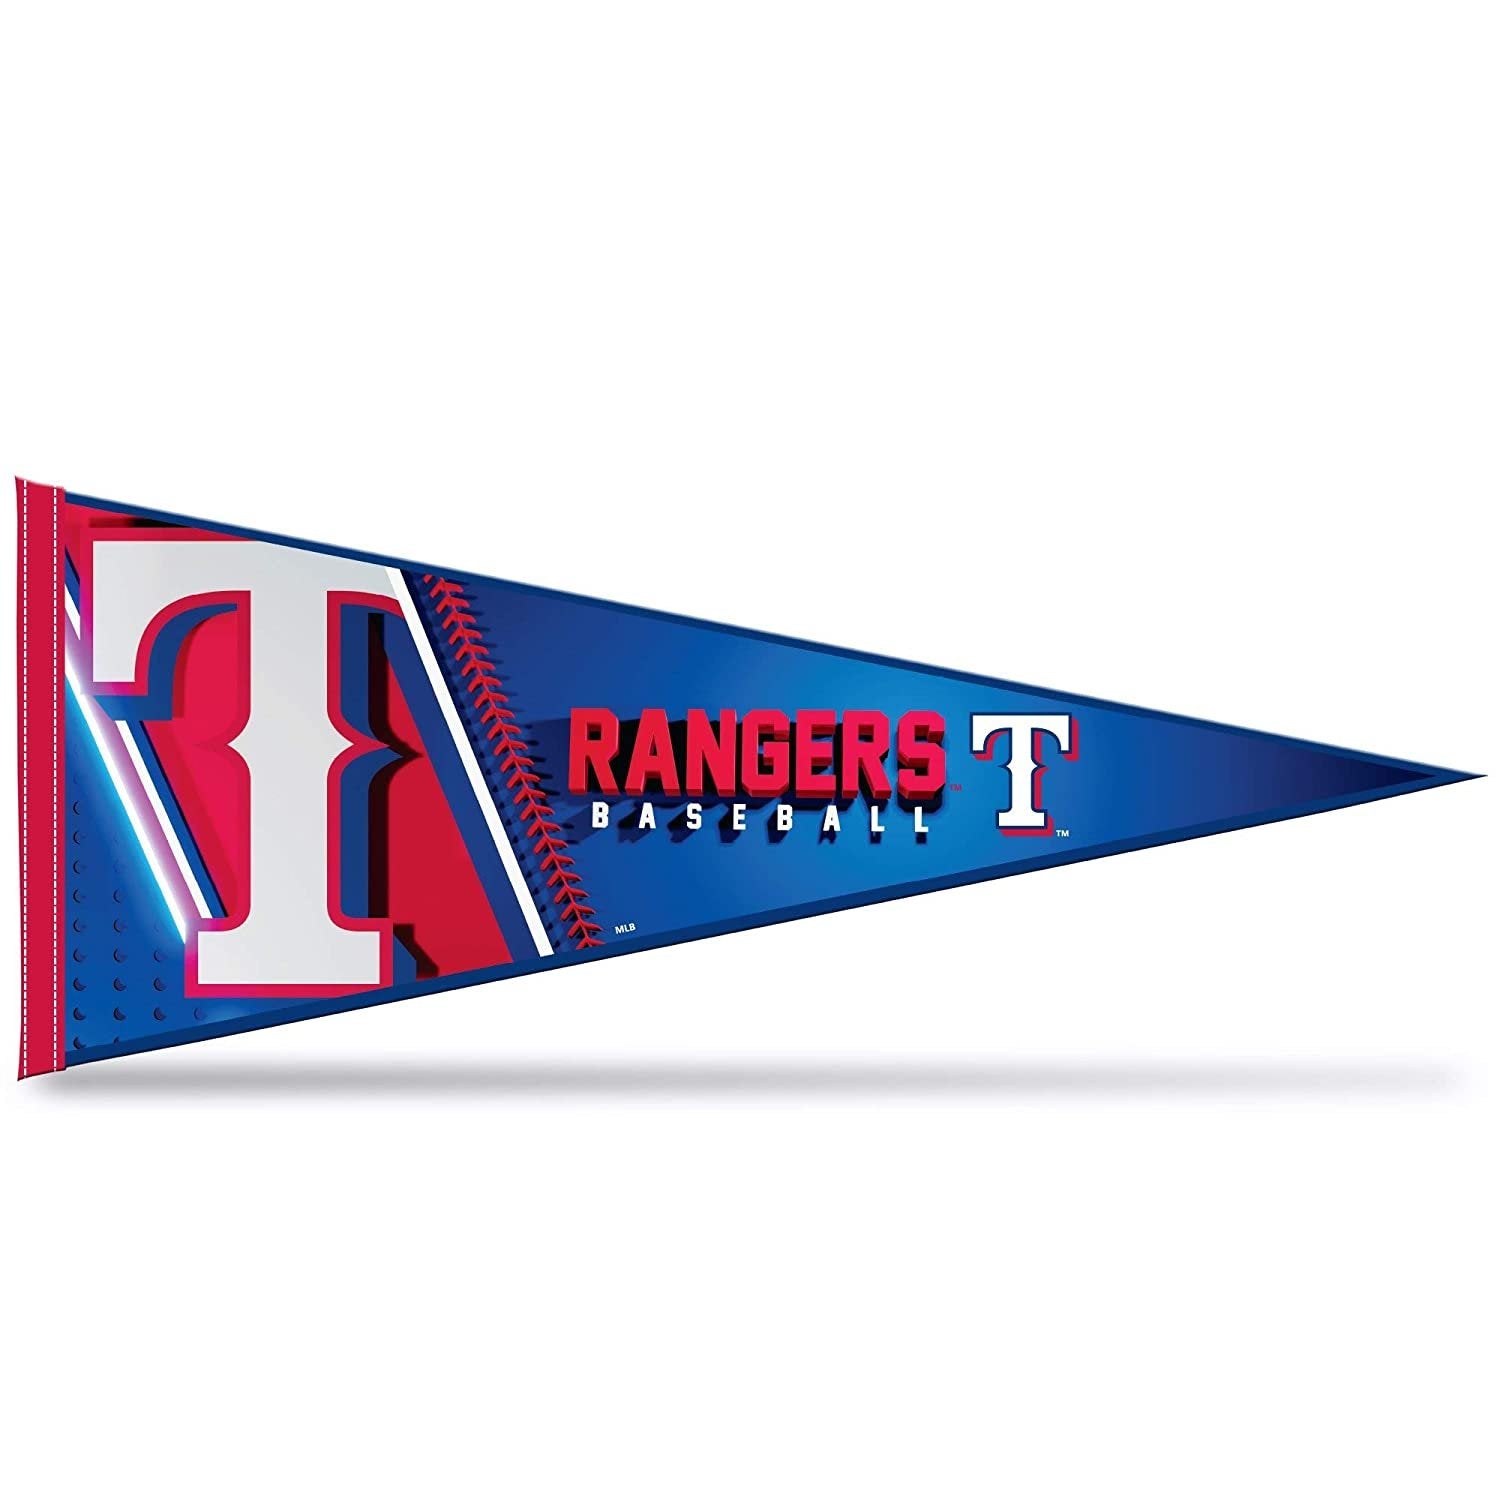 Texas Rangers Soft Felt Pennant, Primary Design, 12x30 Inch, Easy To Hang